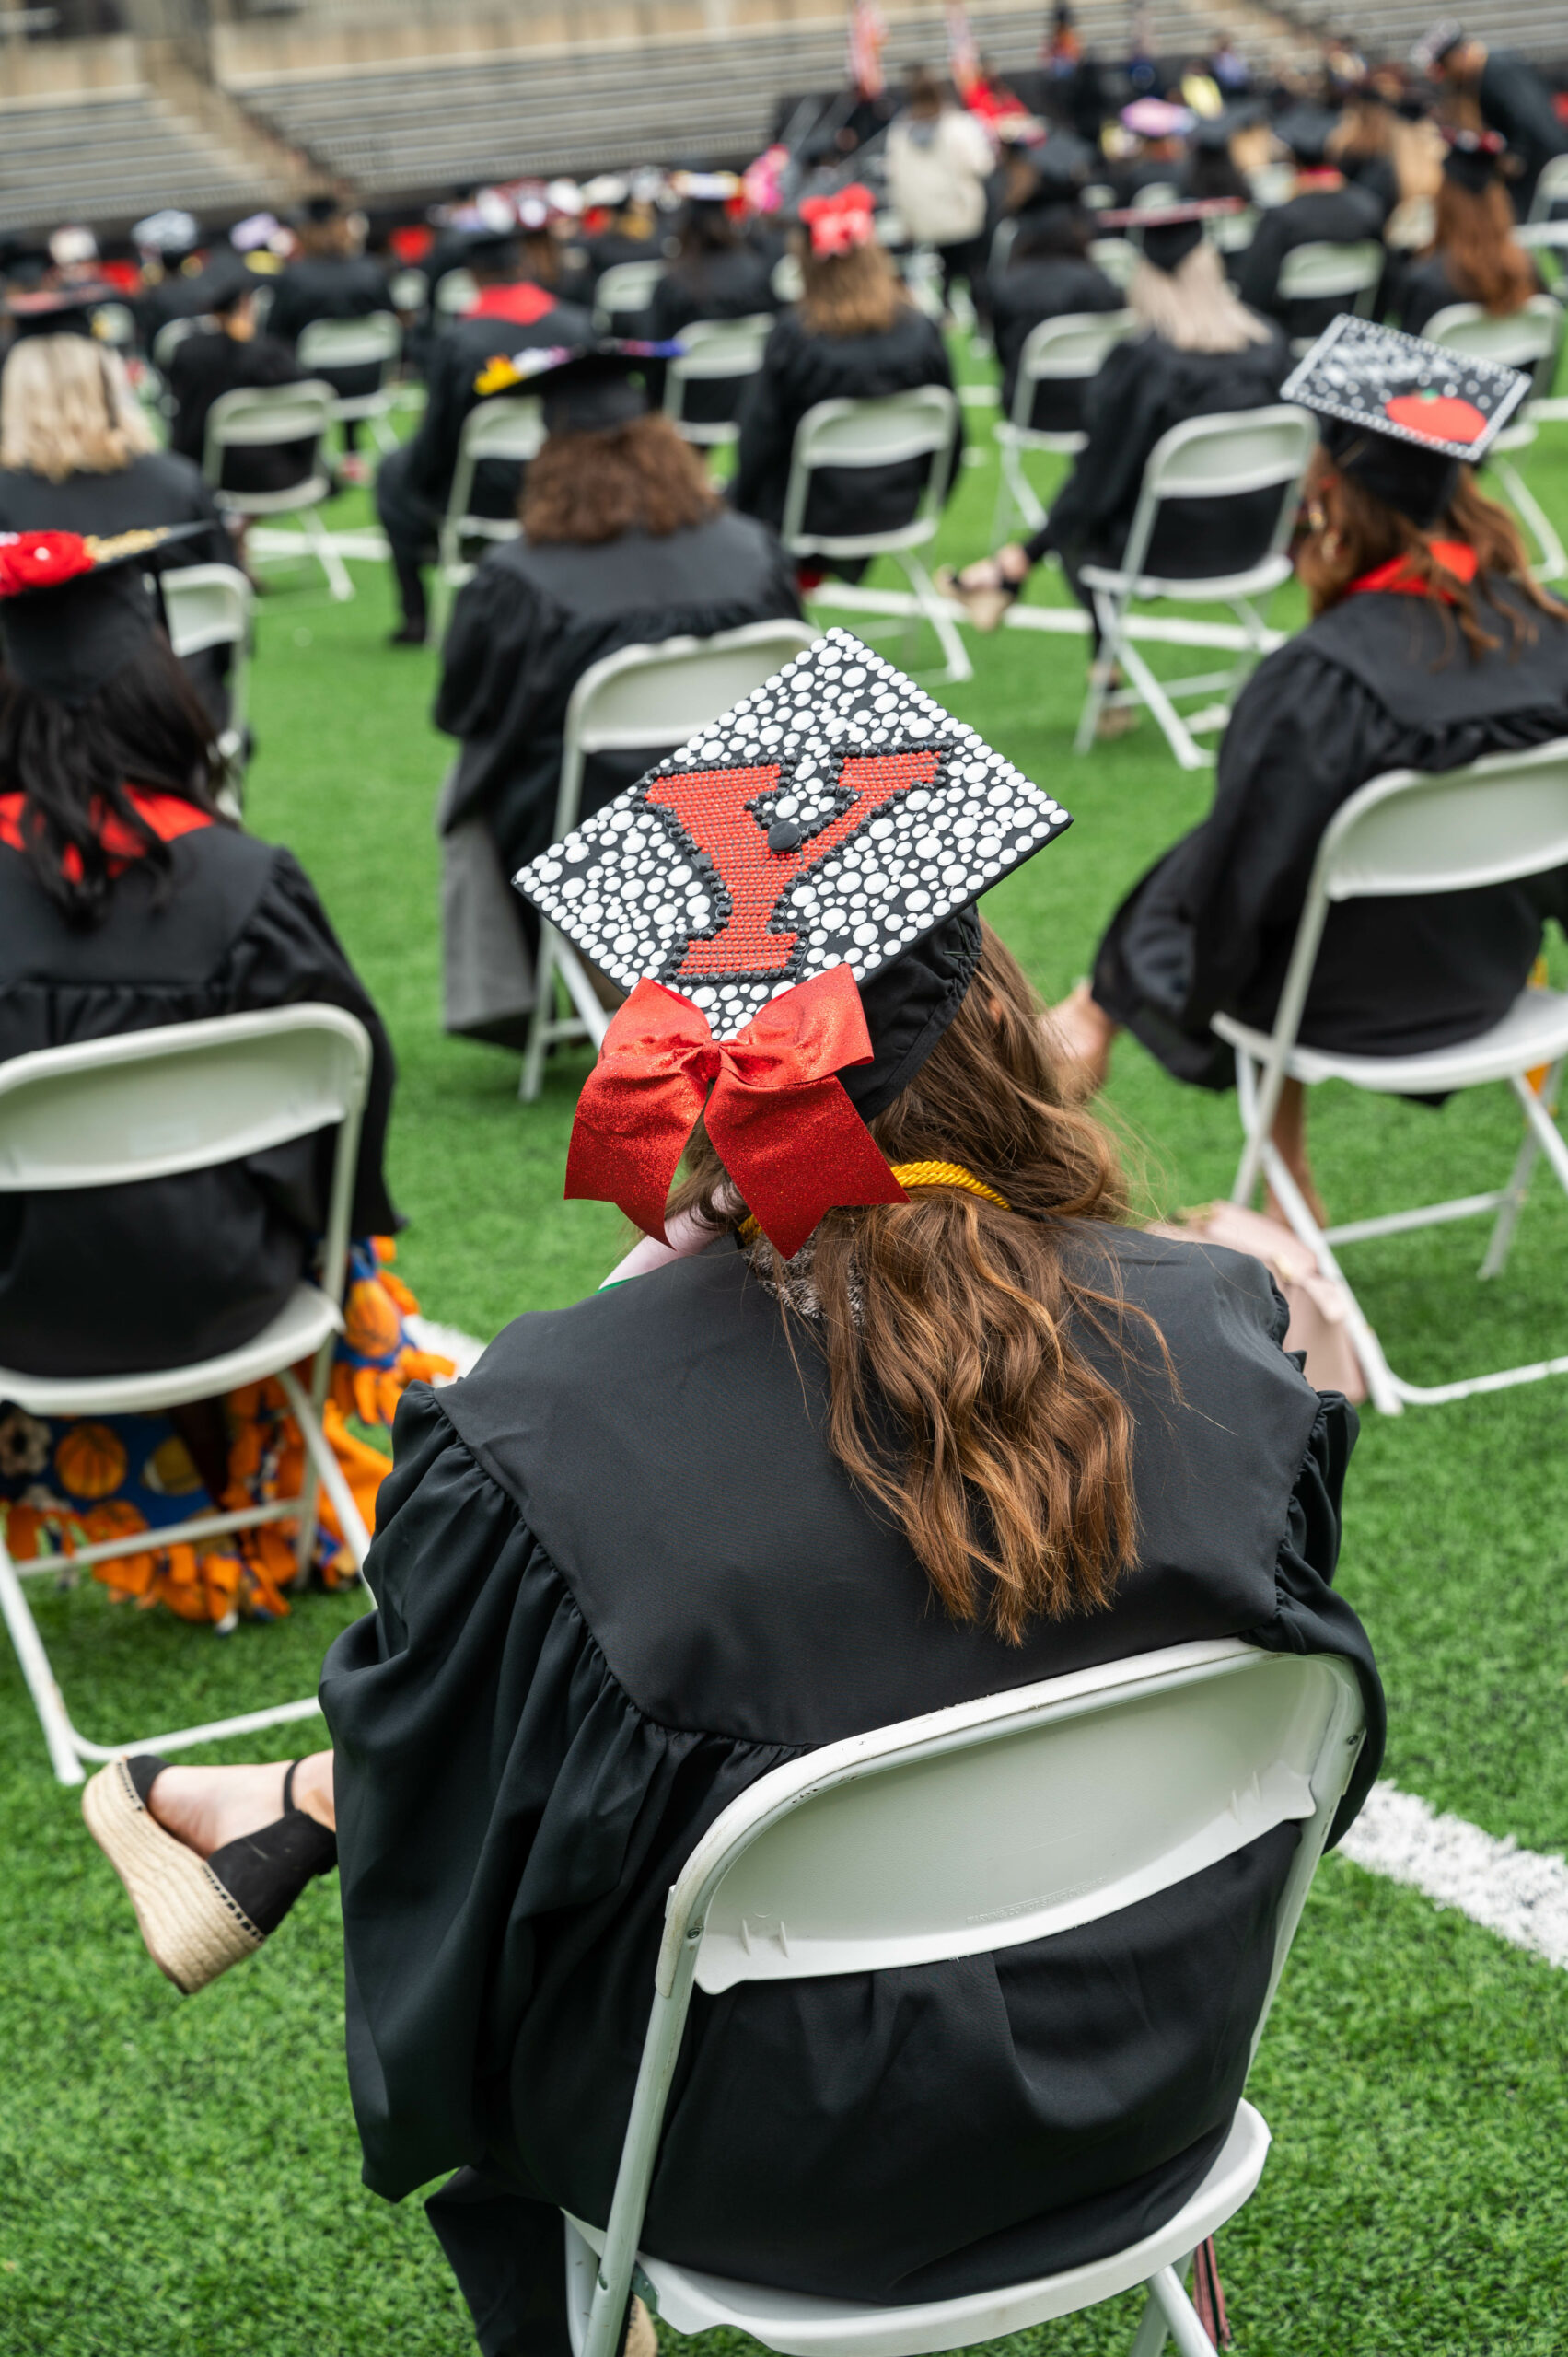 YSU student at Spring 2021 Commencement